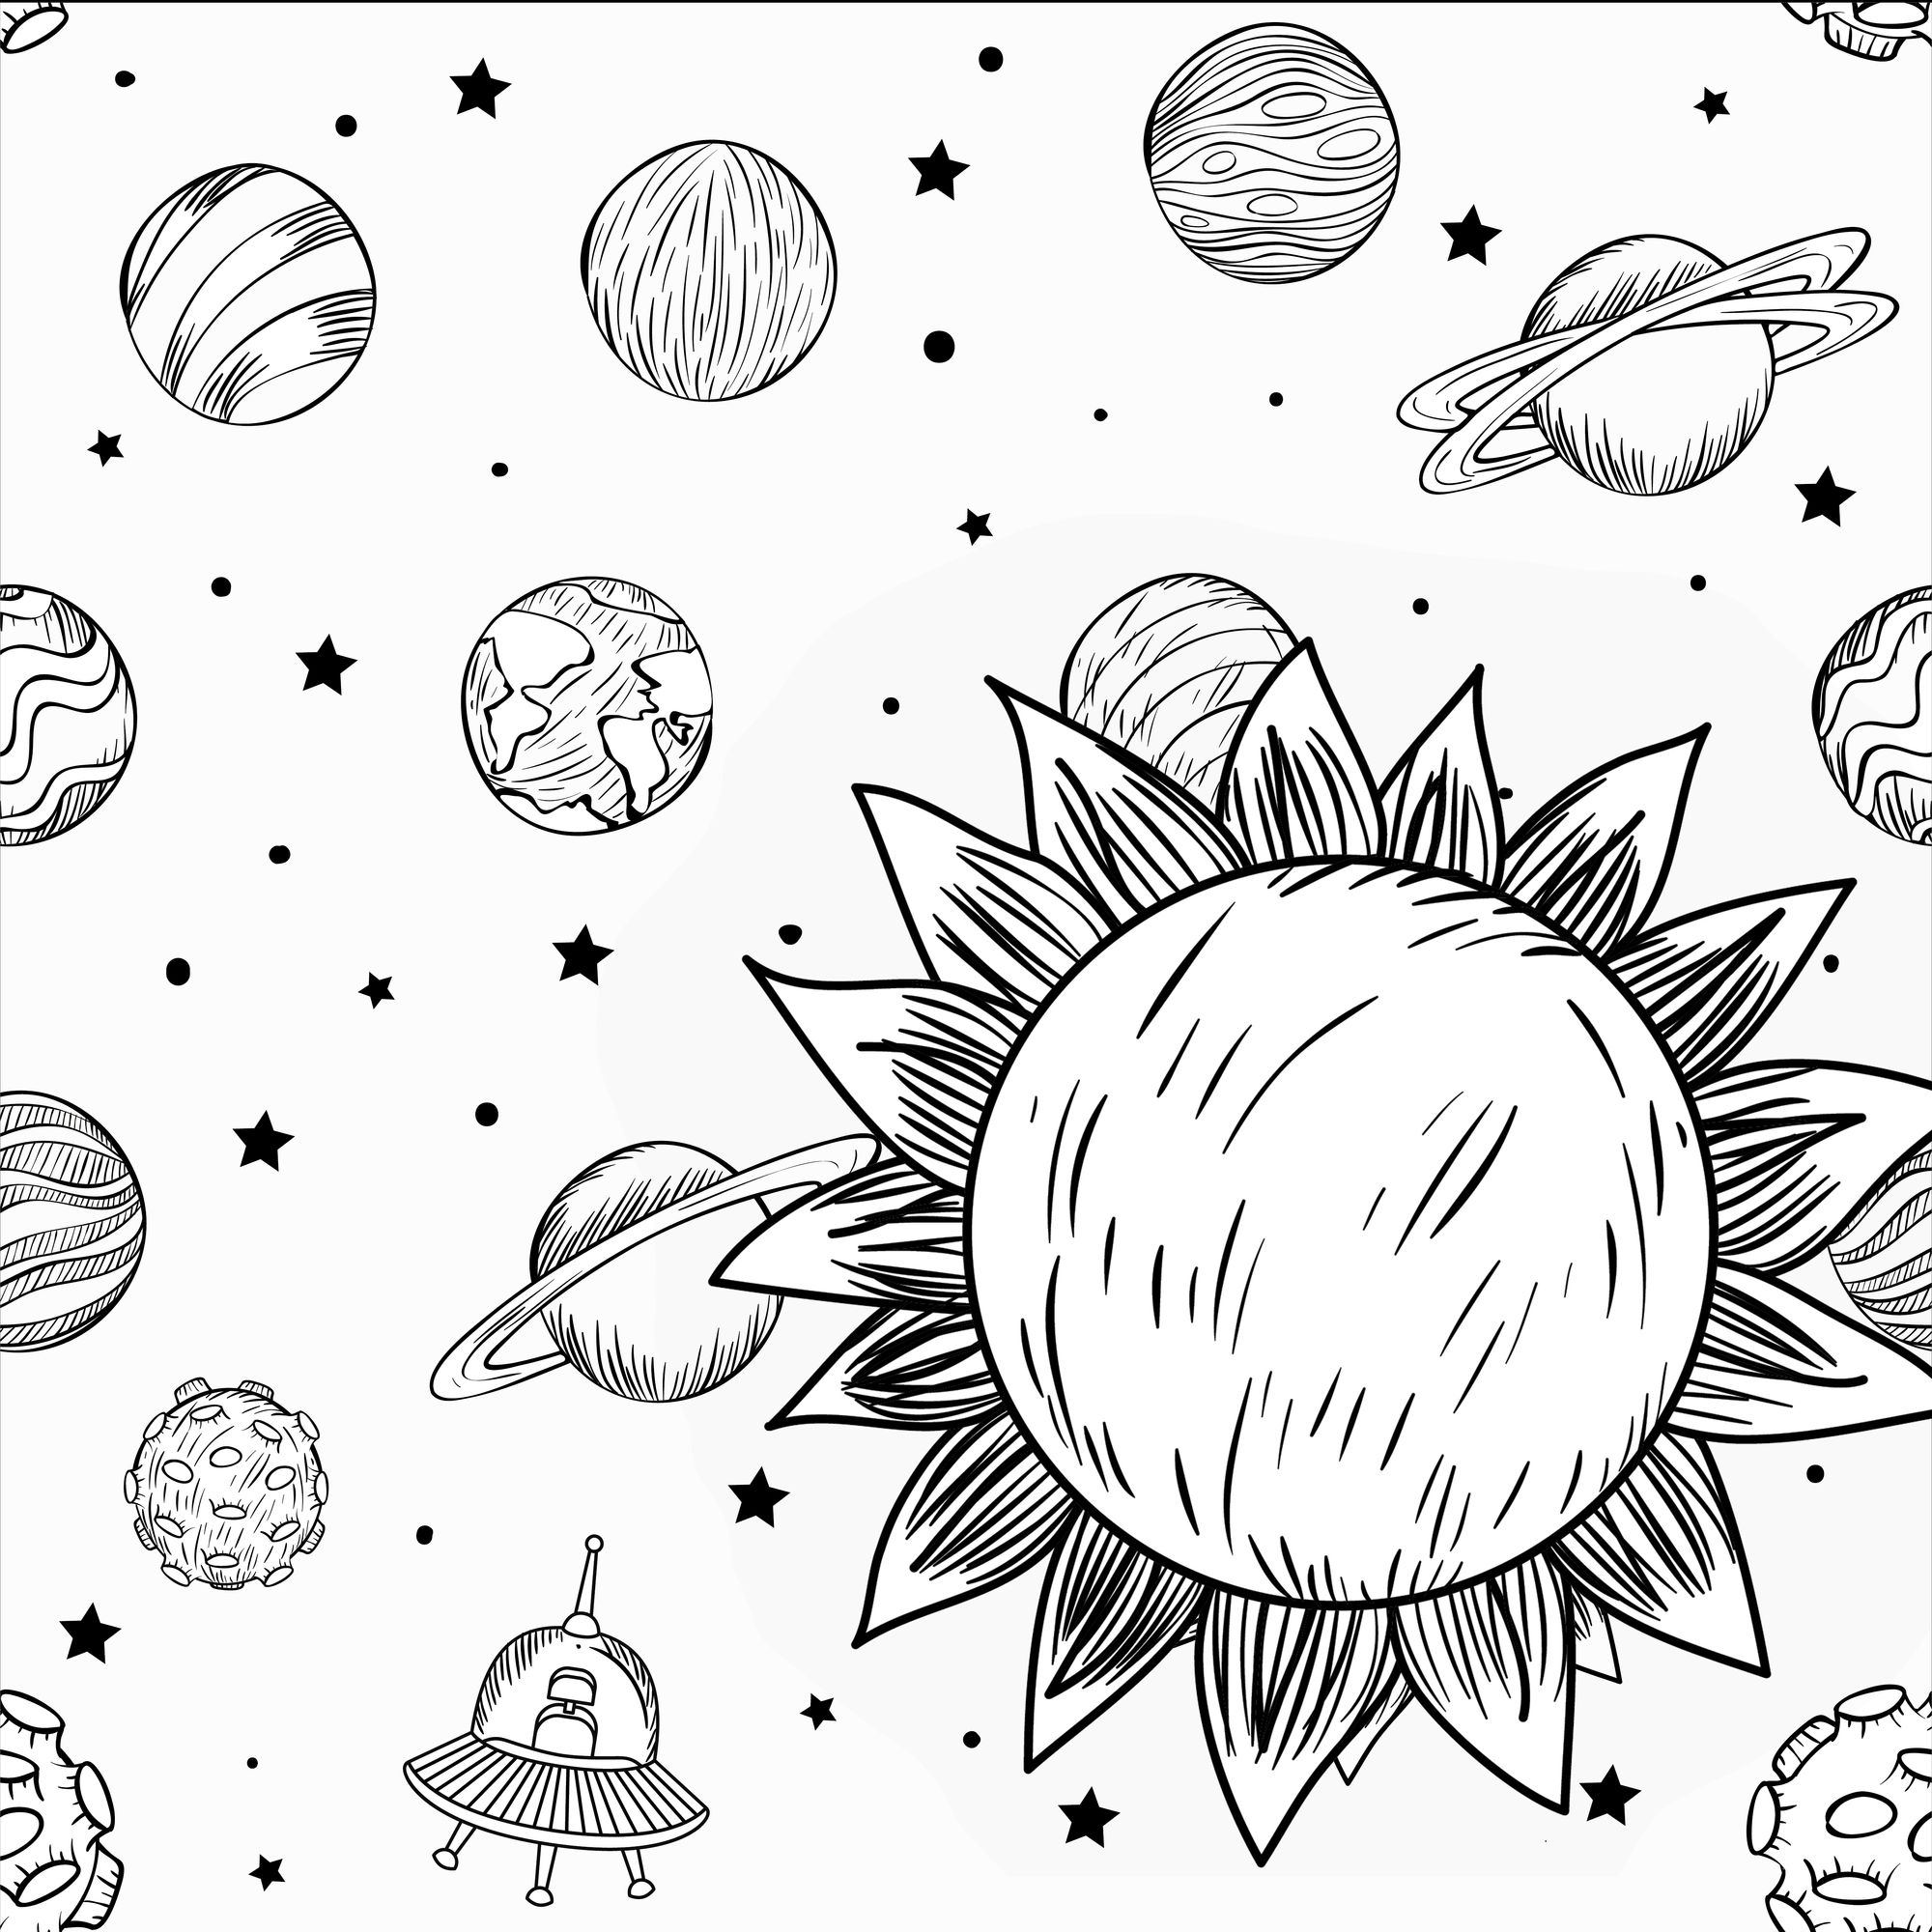 A black-and-white image of planets in space, with a alien looking spaceship in the corner.